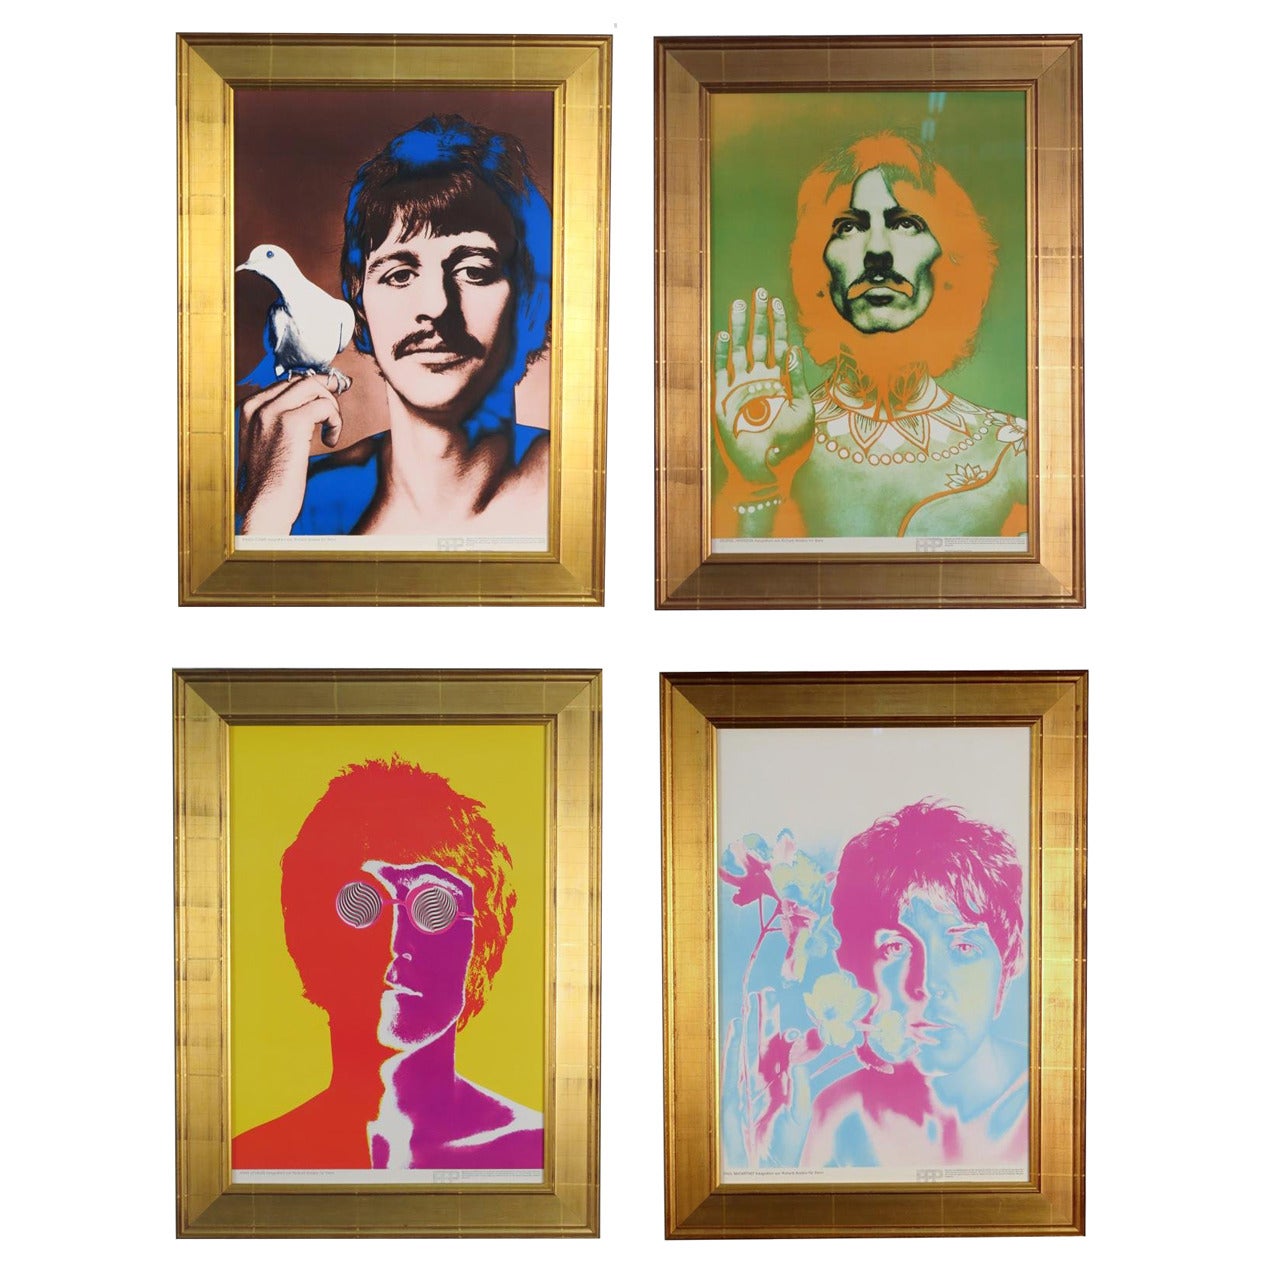 Beatles by Richard Avedon 1967 Posters for Stern Magazine